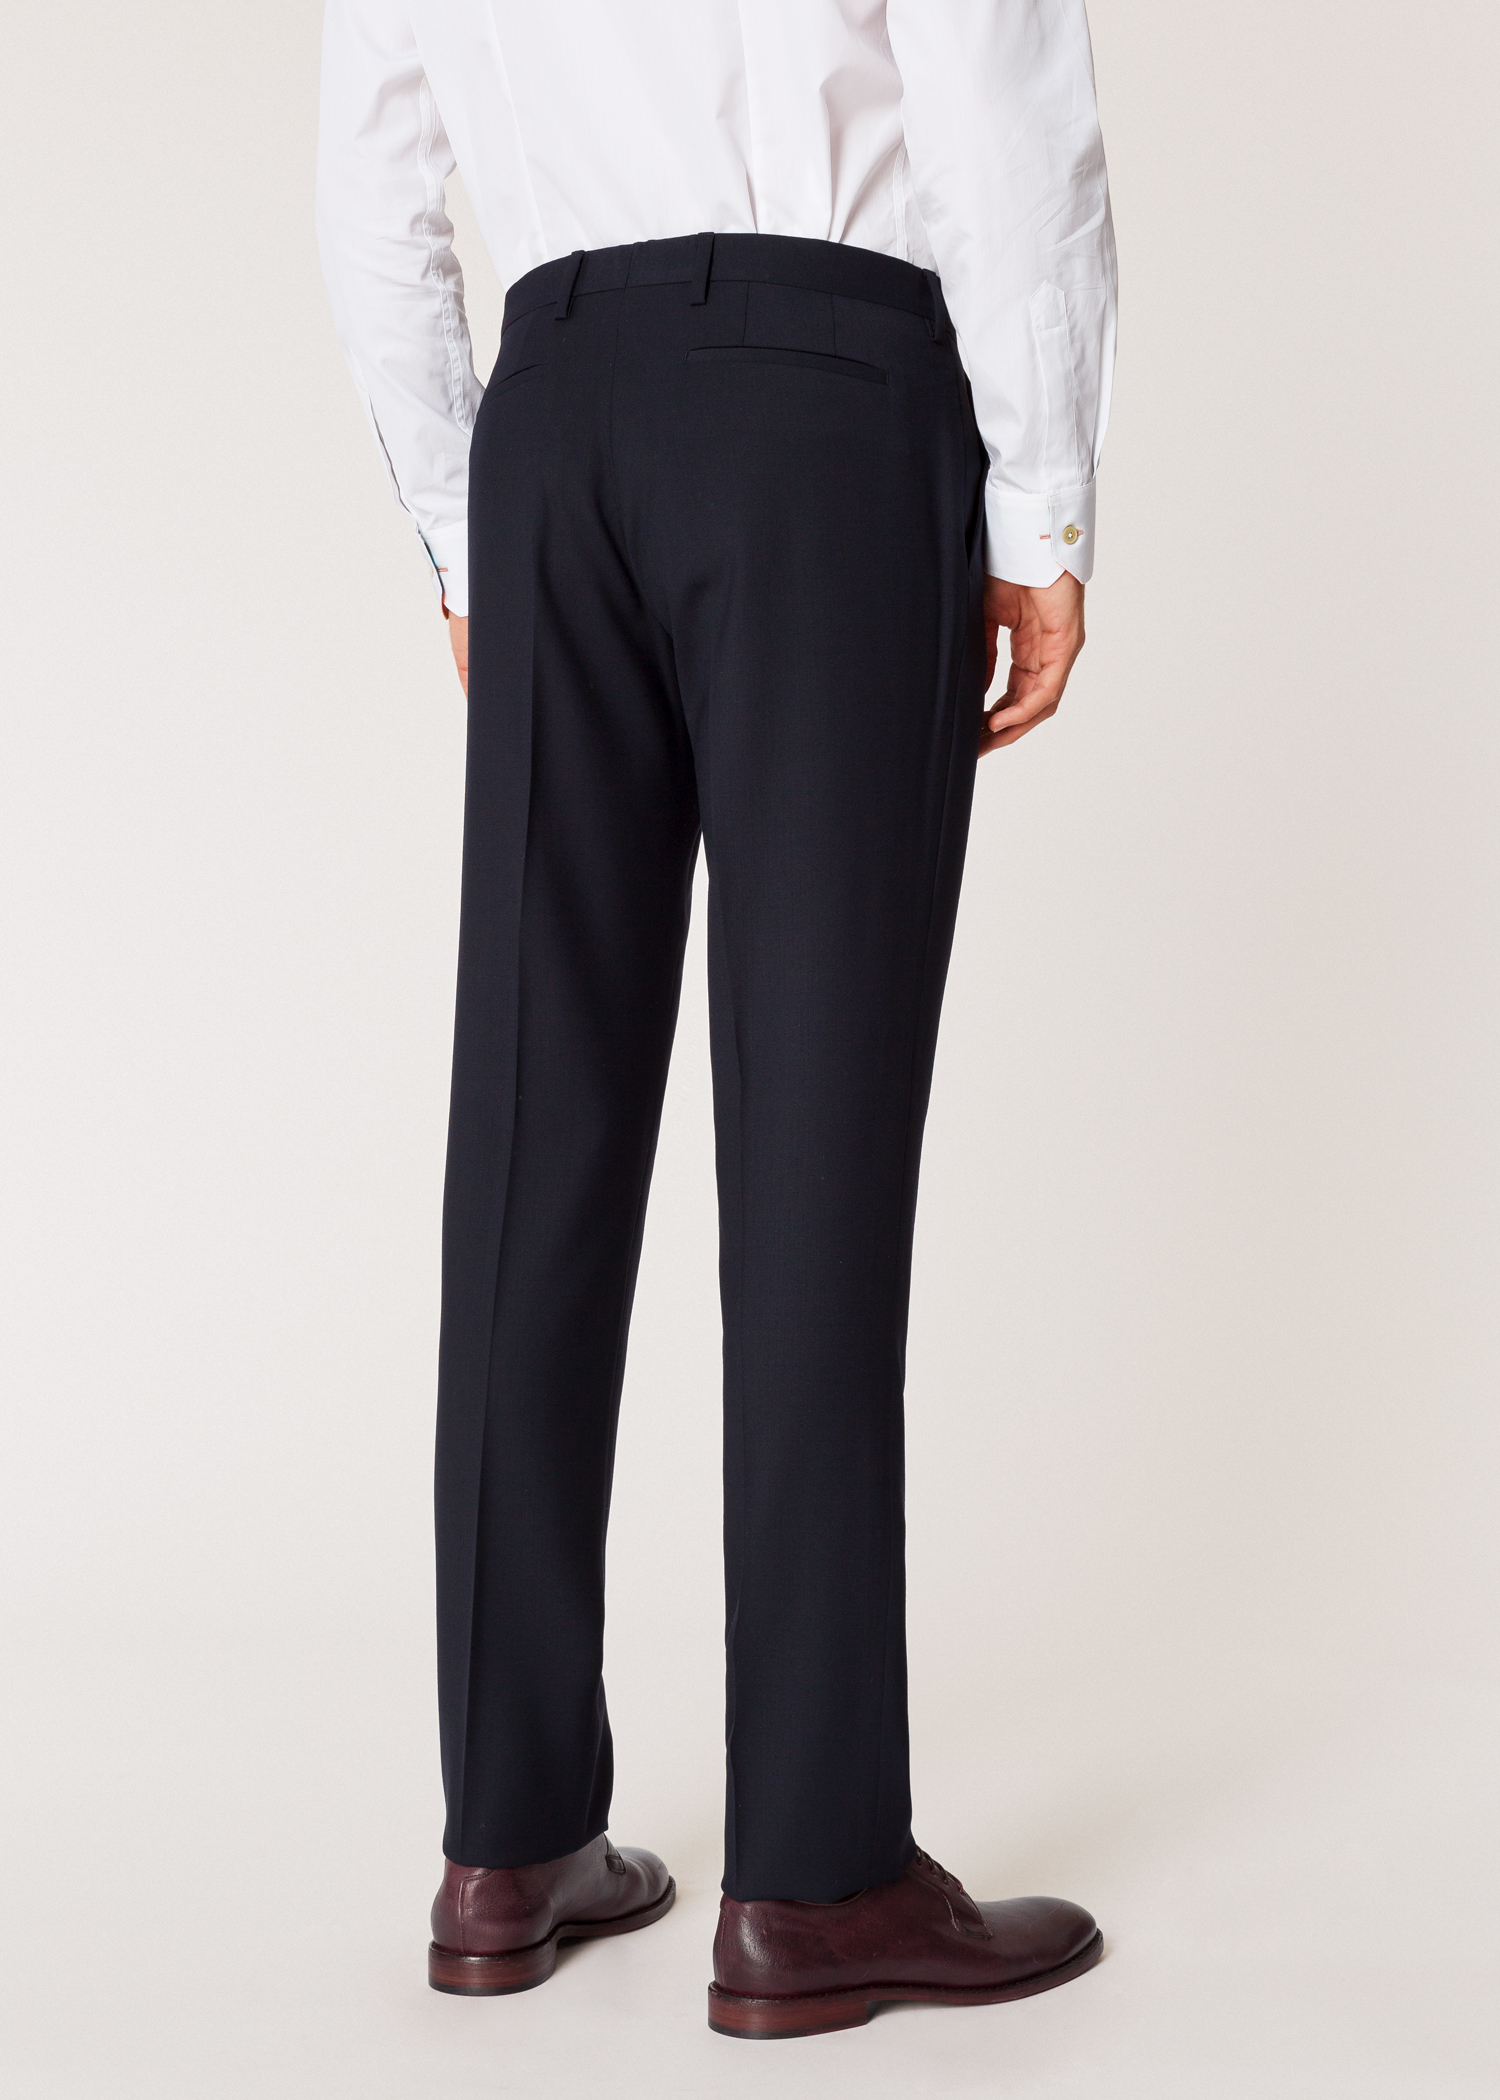 Men's Slim-Fit Navy Wool 'A Suit To Travel In' Pants - Paul Smith US